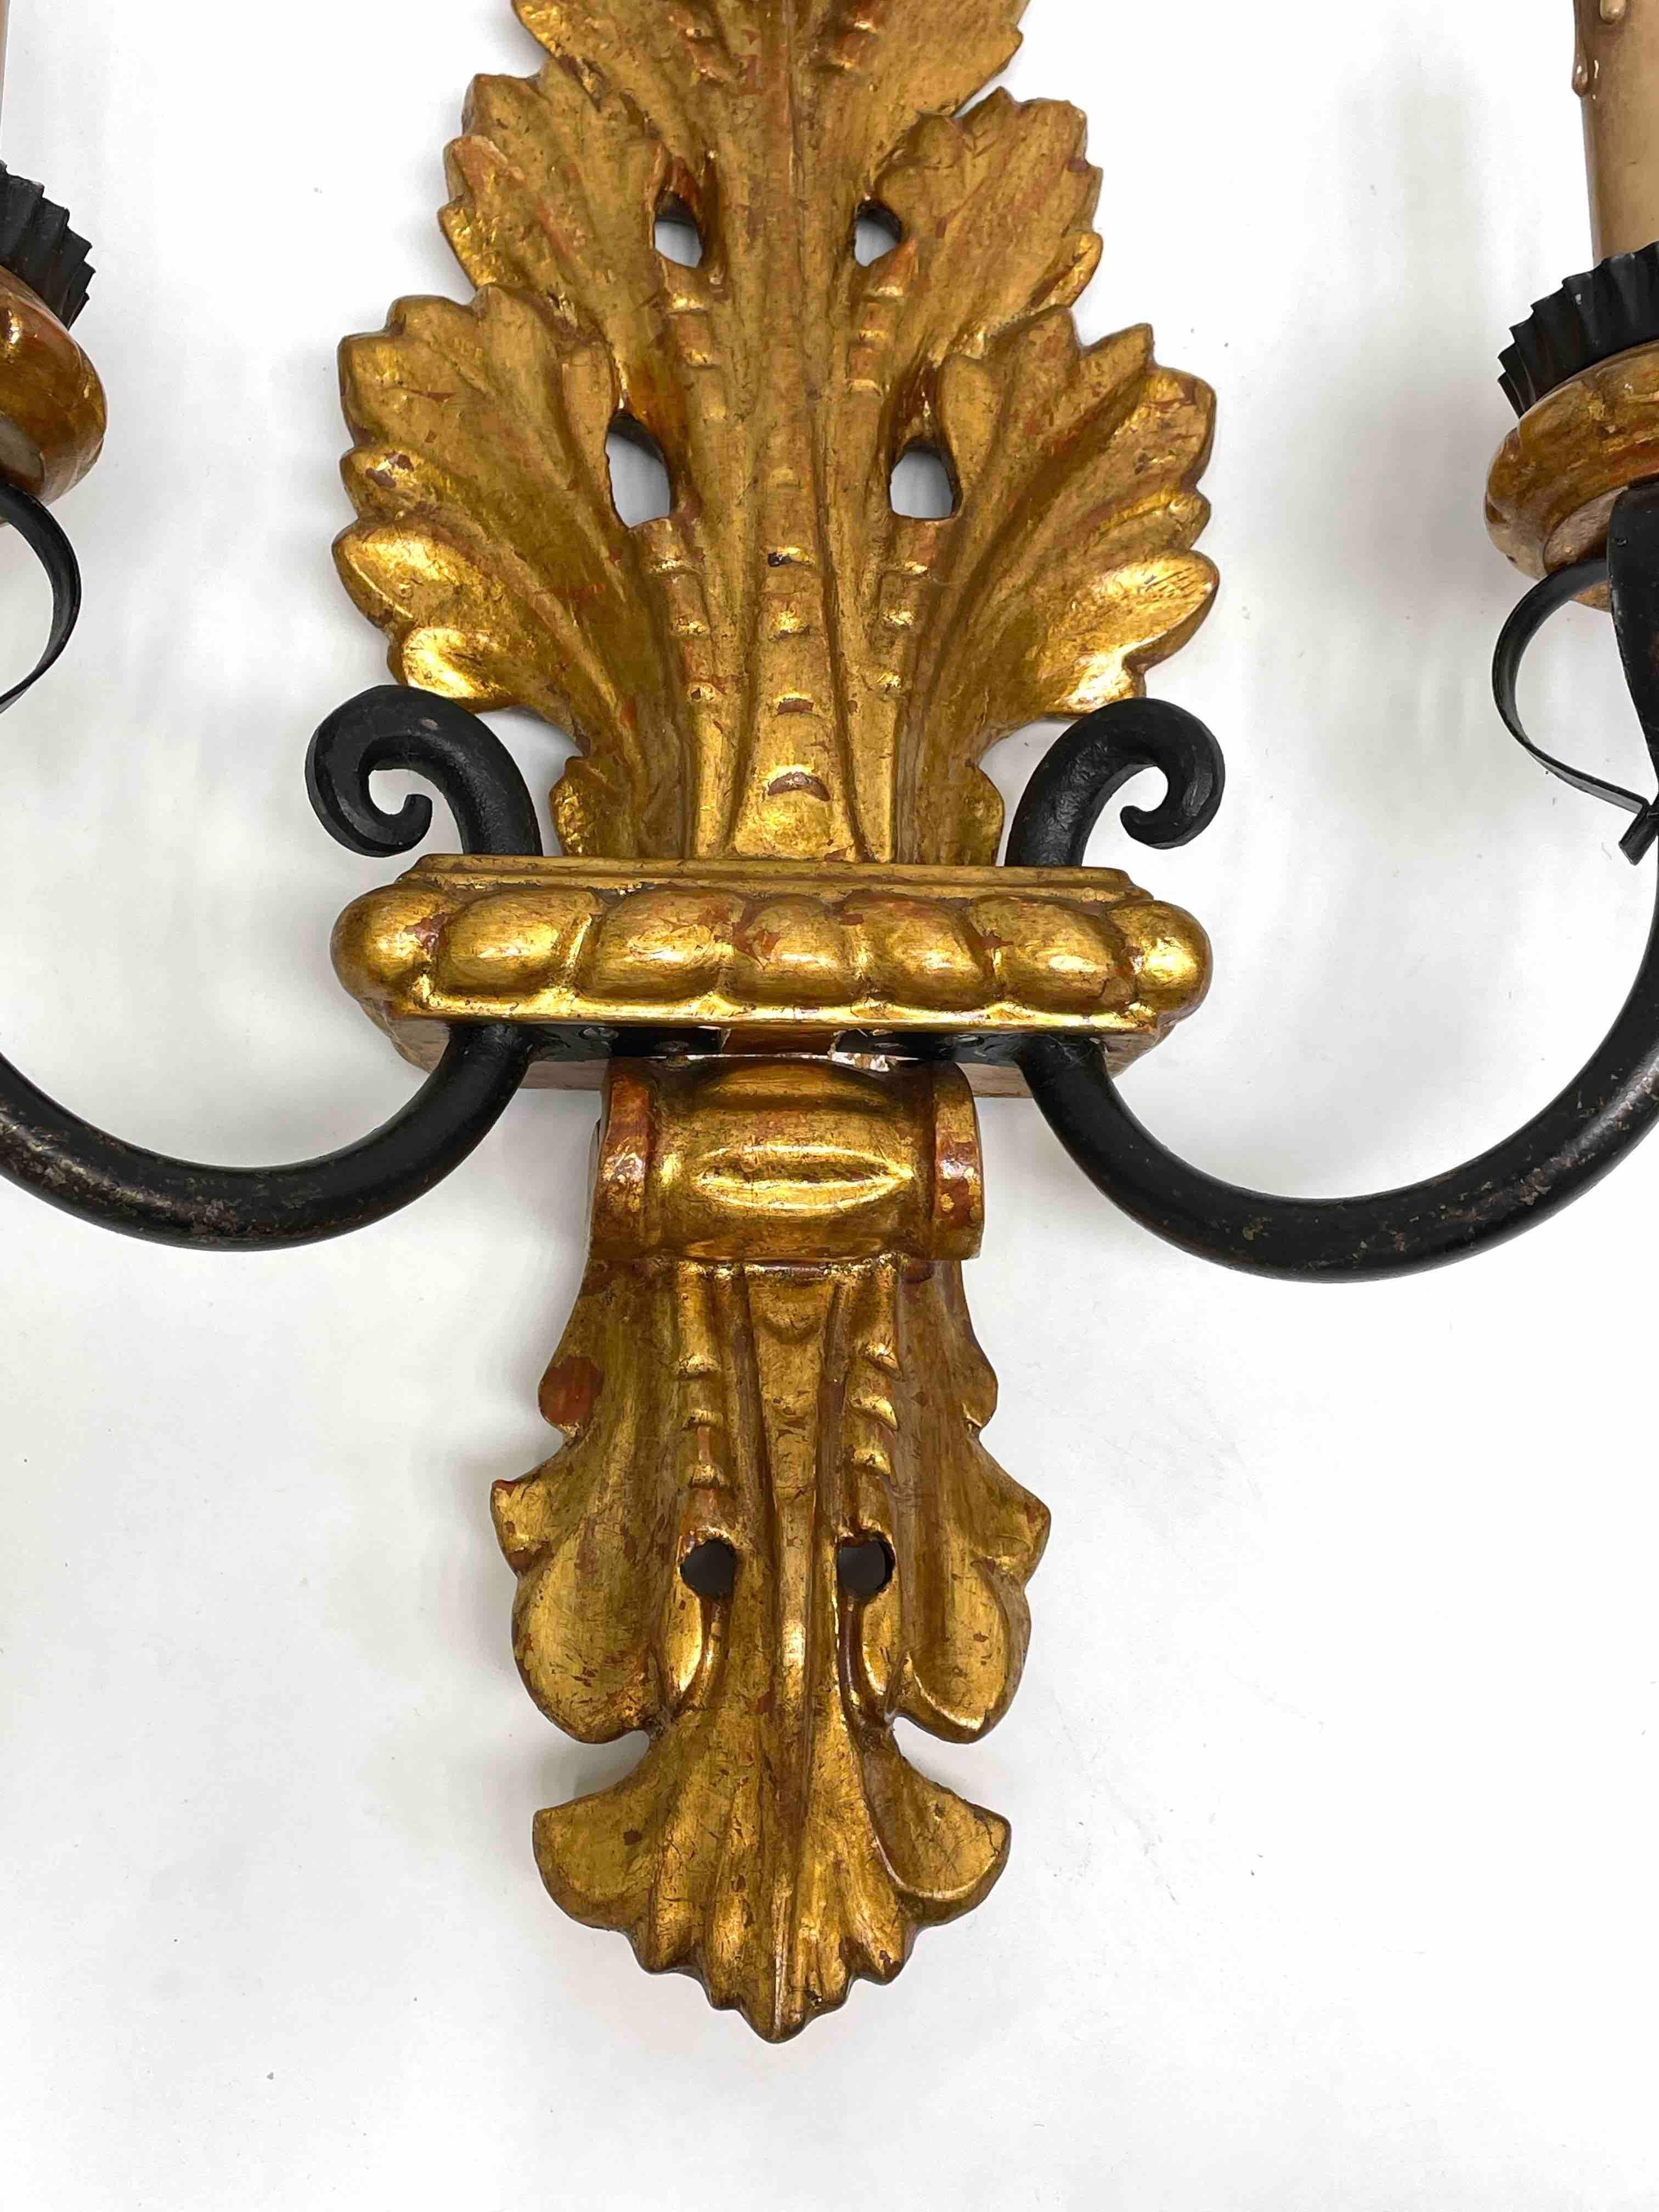 Set of Five Stunning Gilt Wood Tole Florentine Sconces by Banci, Italy, 1970s For Sale 5